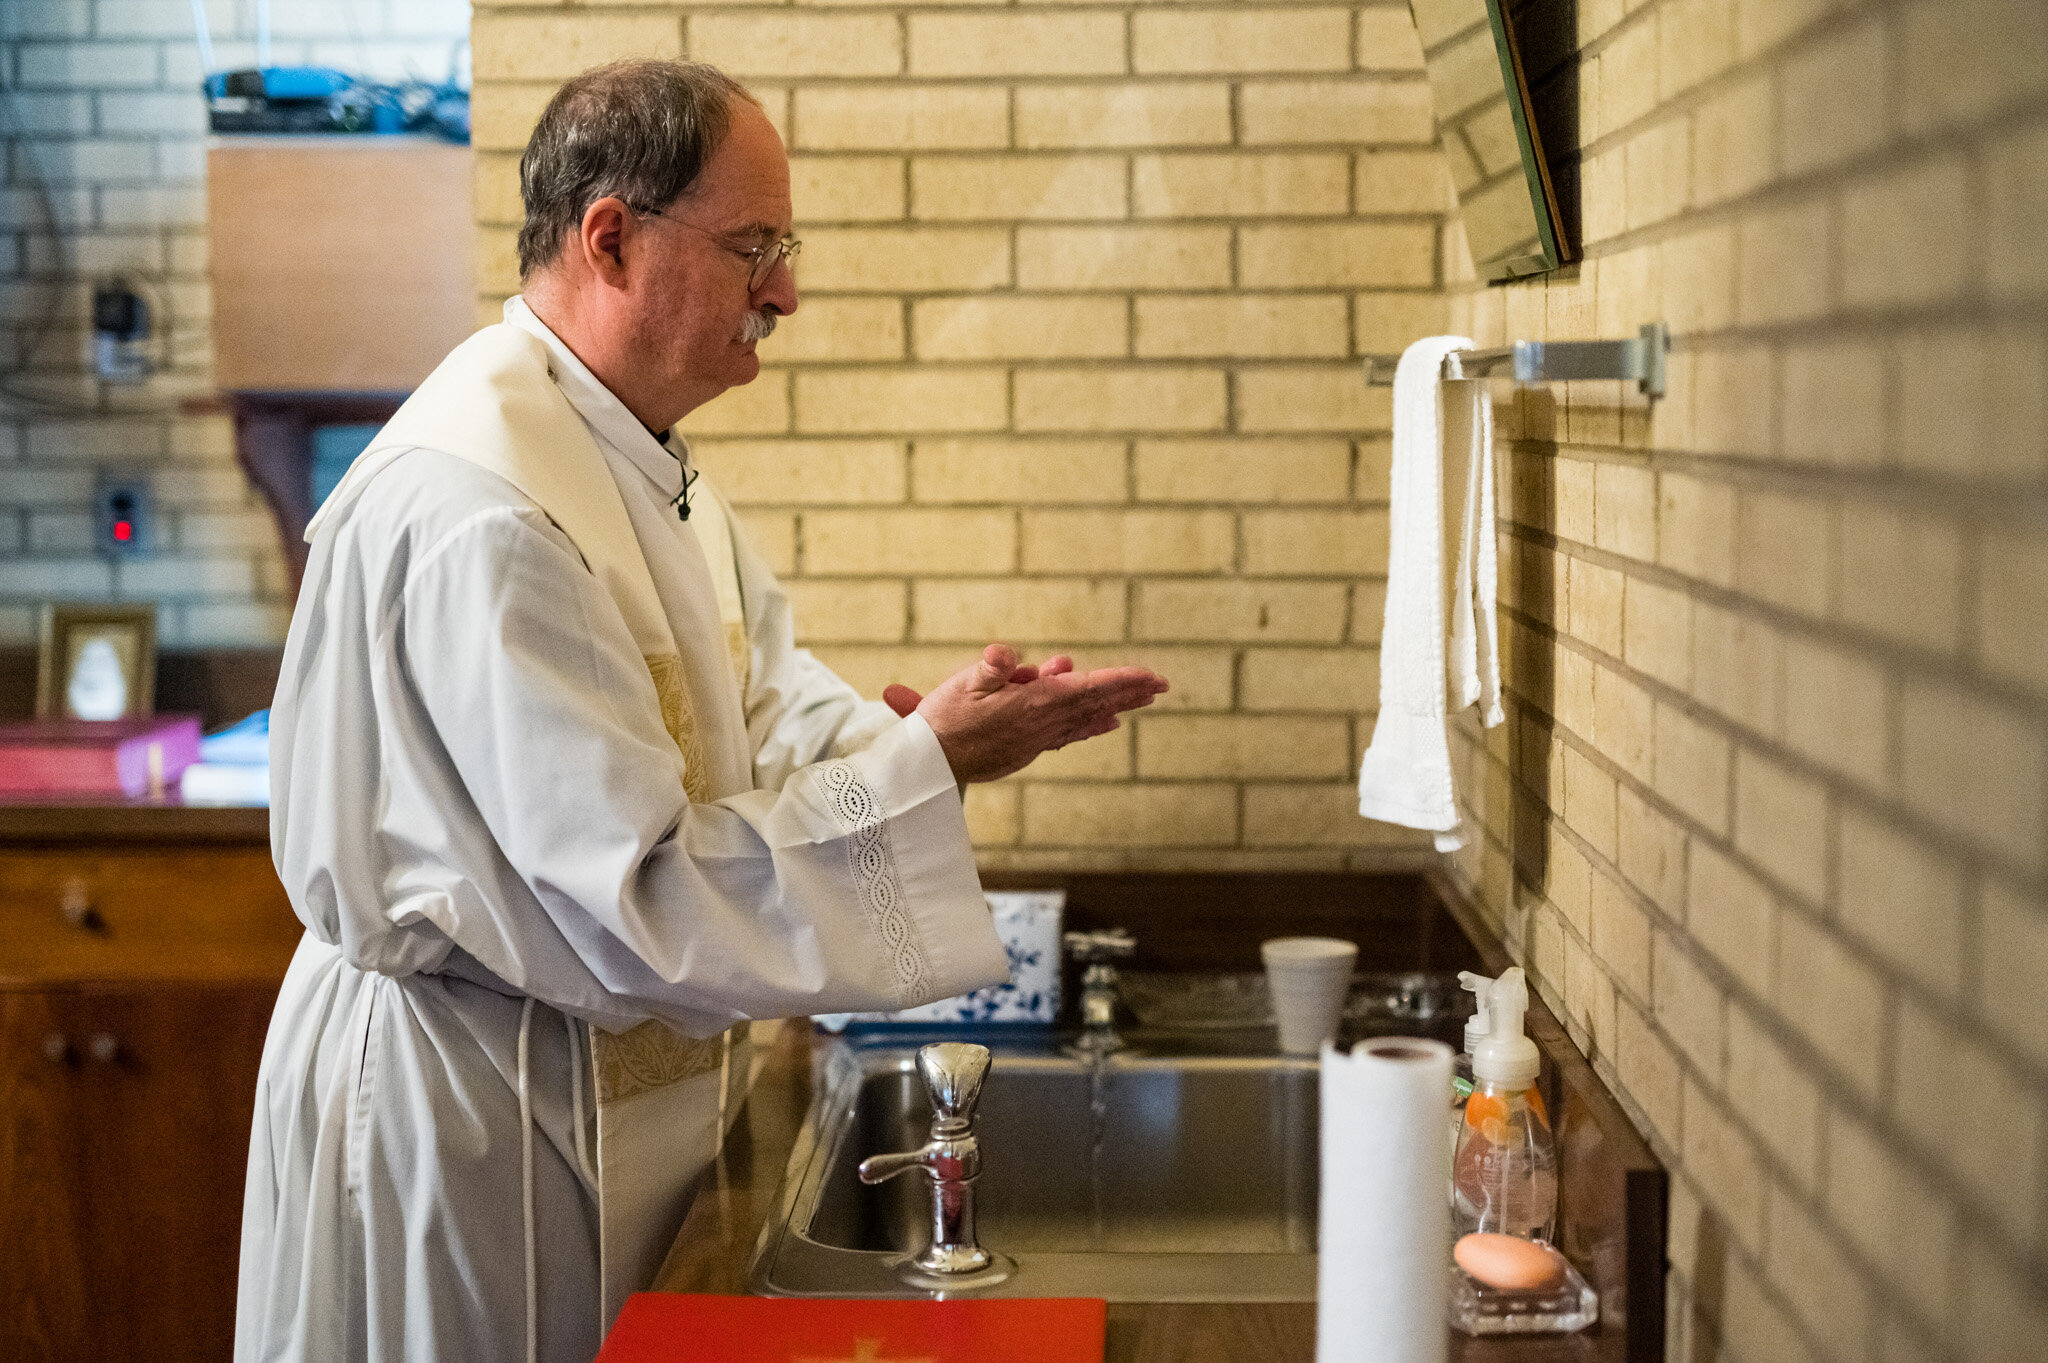 A priest washes his hands before an elopement ceremony during COVID-19